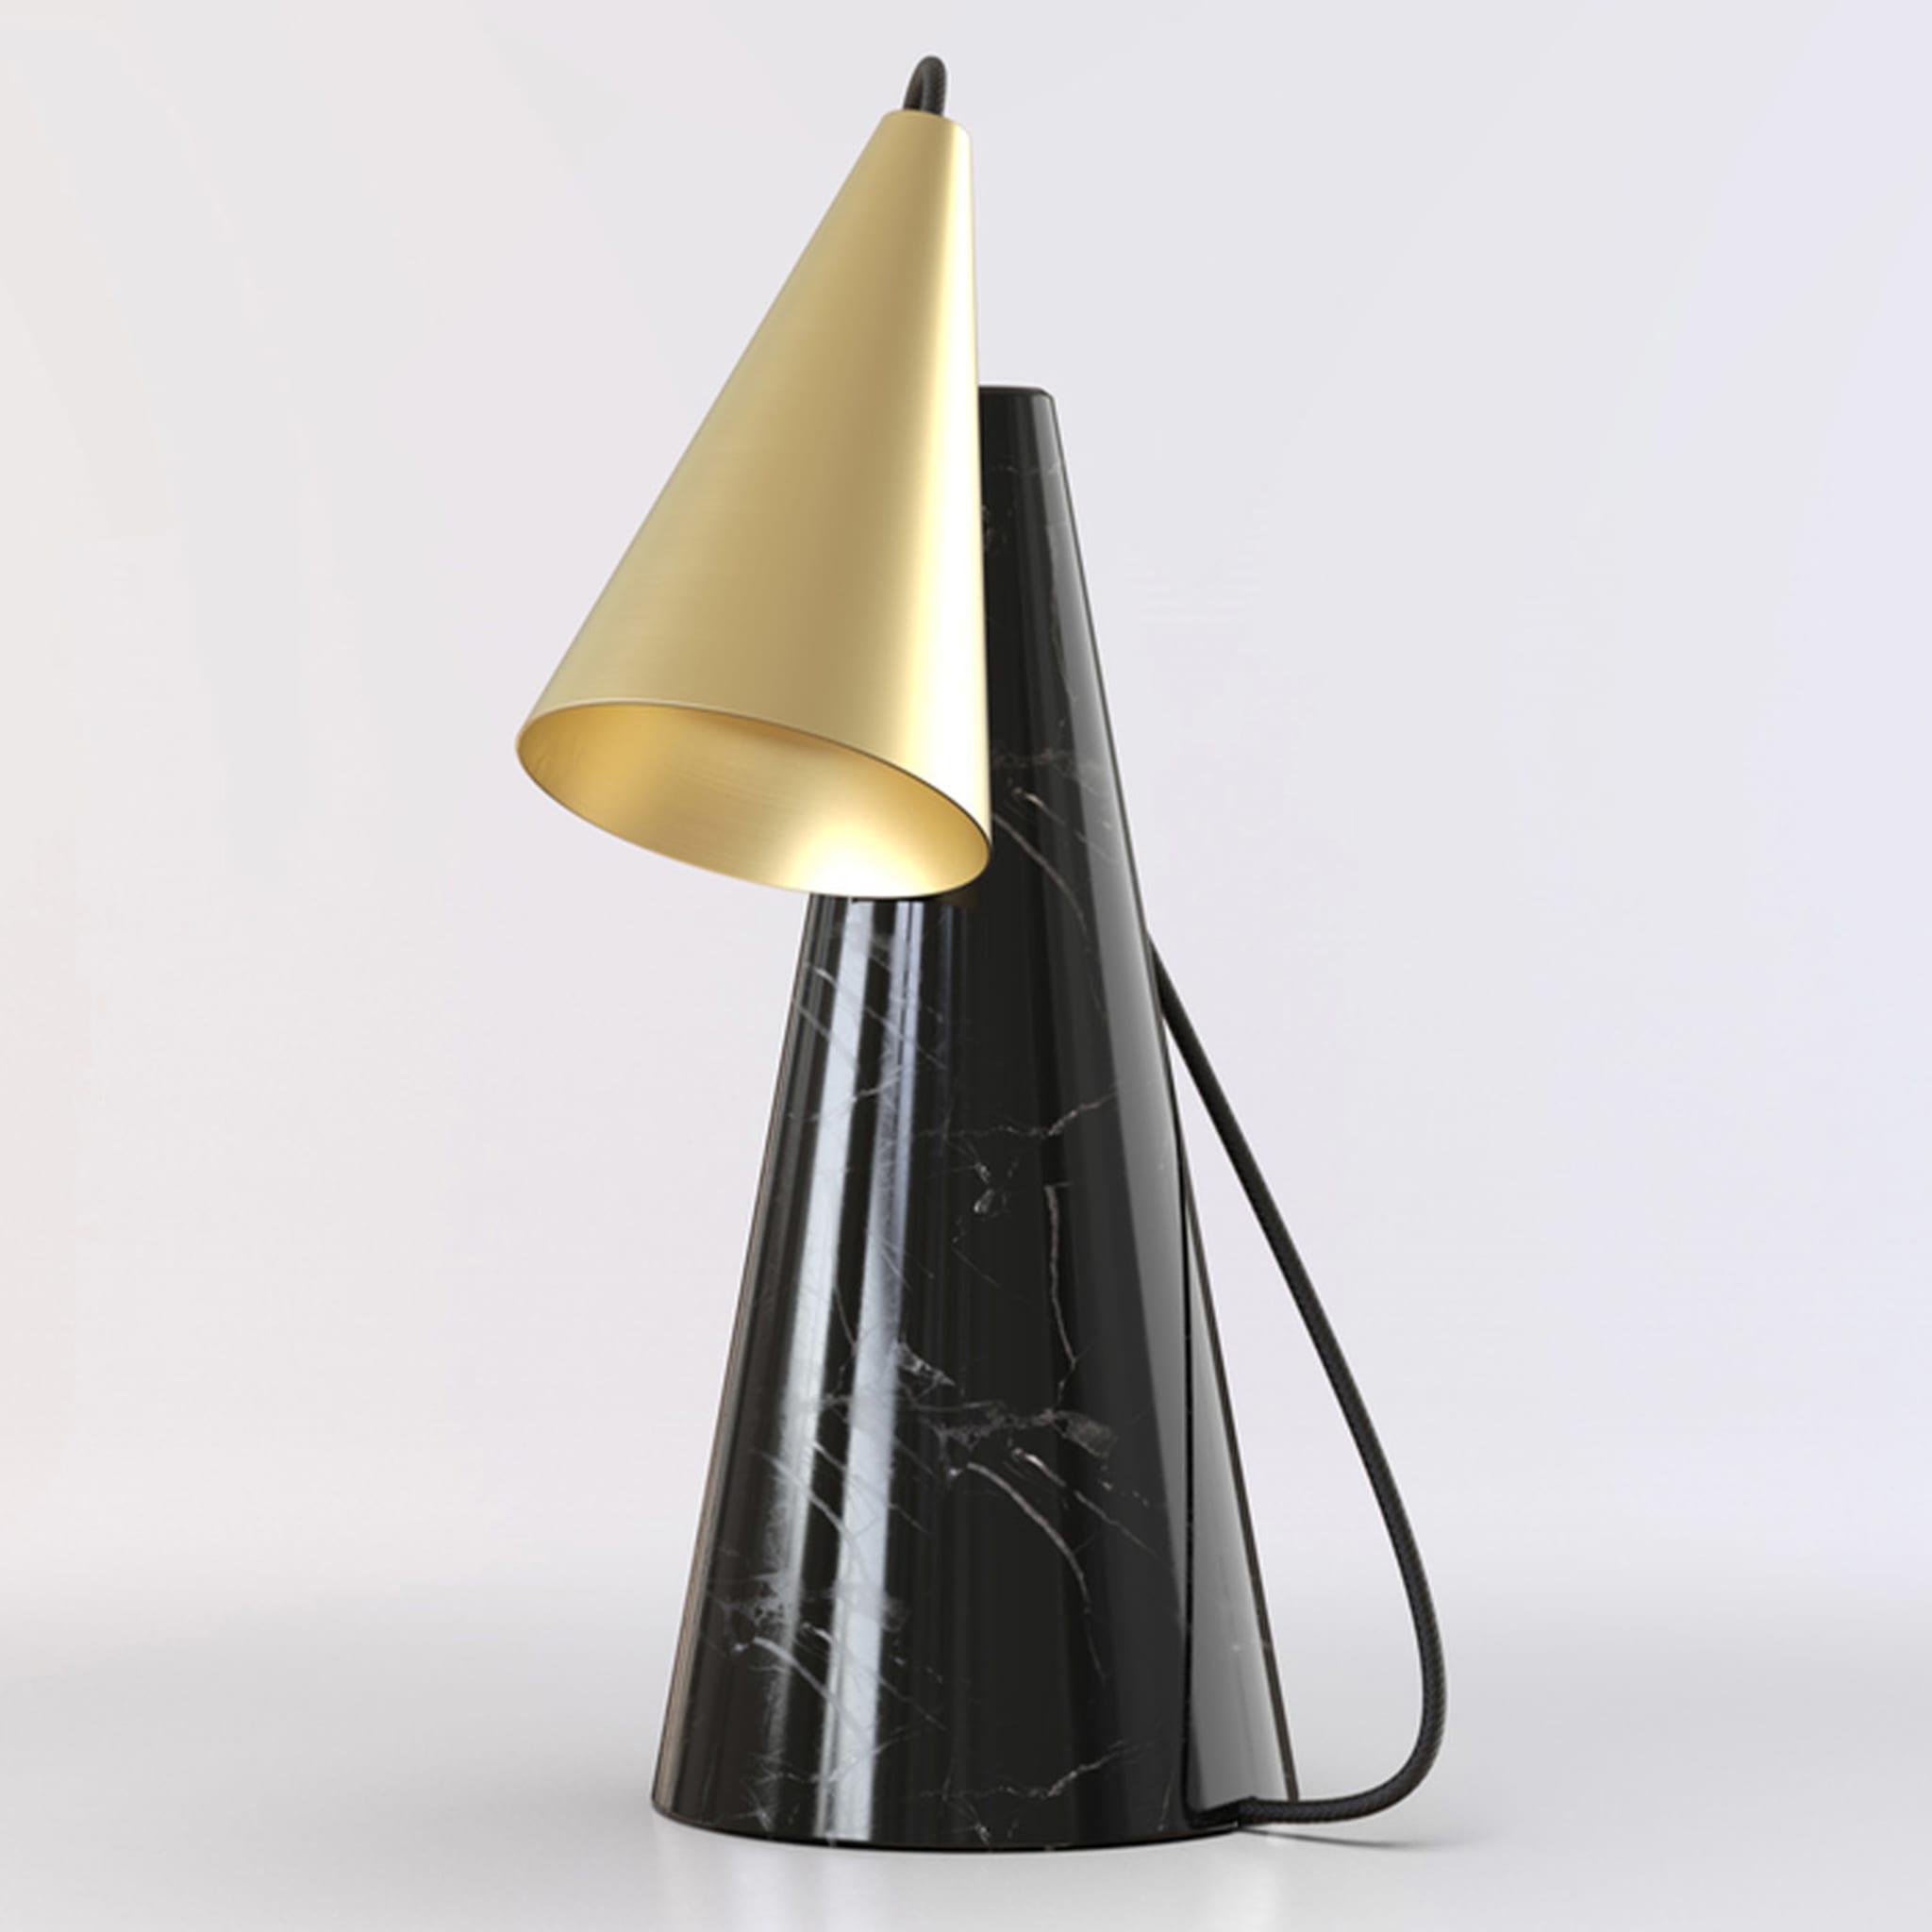 ED038 Black Stone and Brass Table Lamp - Alternative view 1